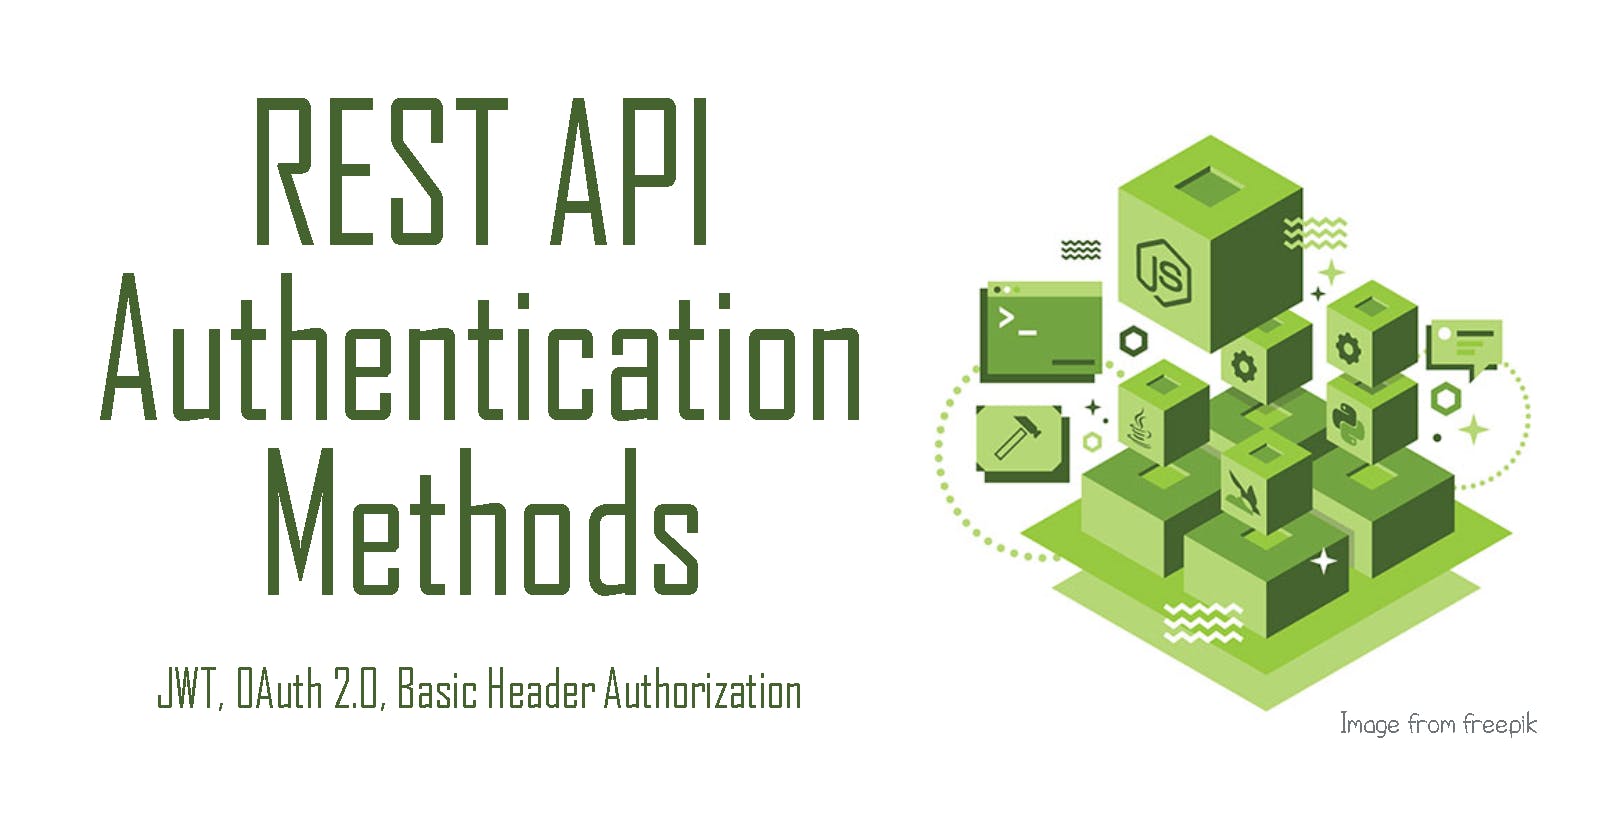 Introduction to REST API Authentication Methods